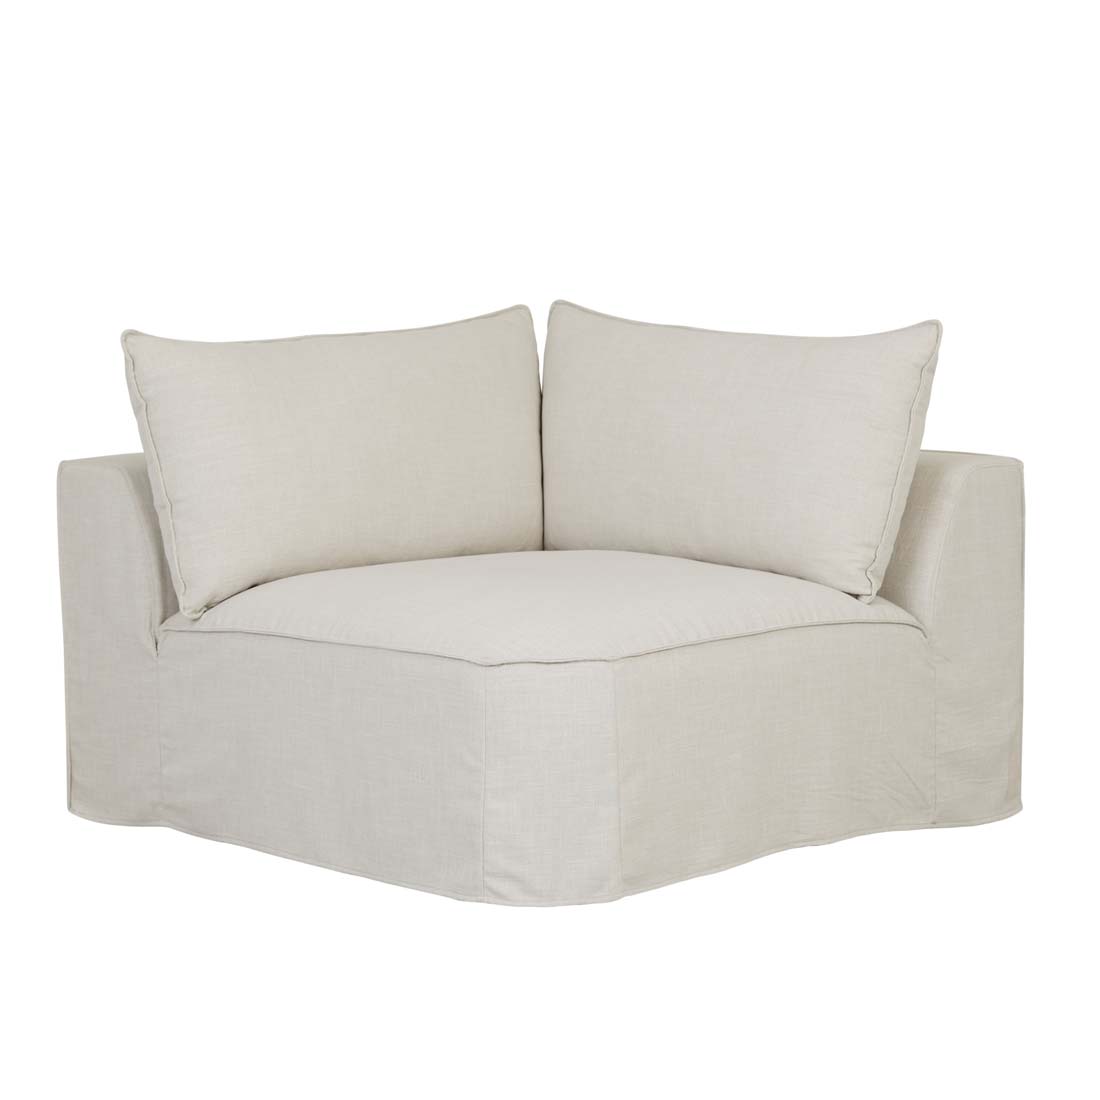 Airlie Slouch 1 Seater Corner Sofa image 13